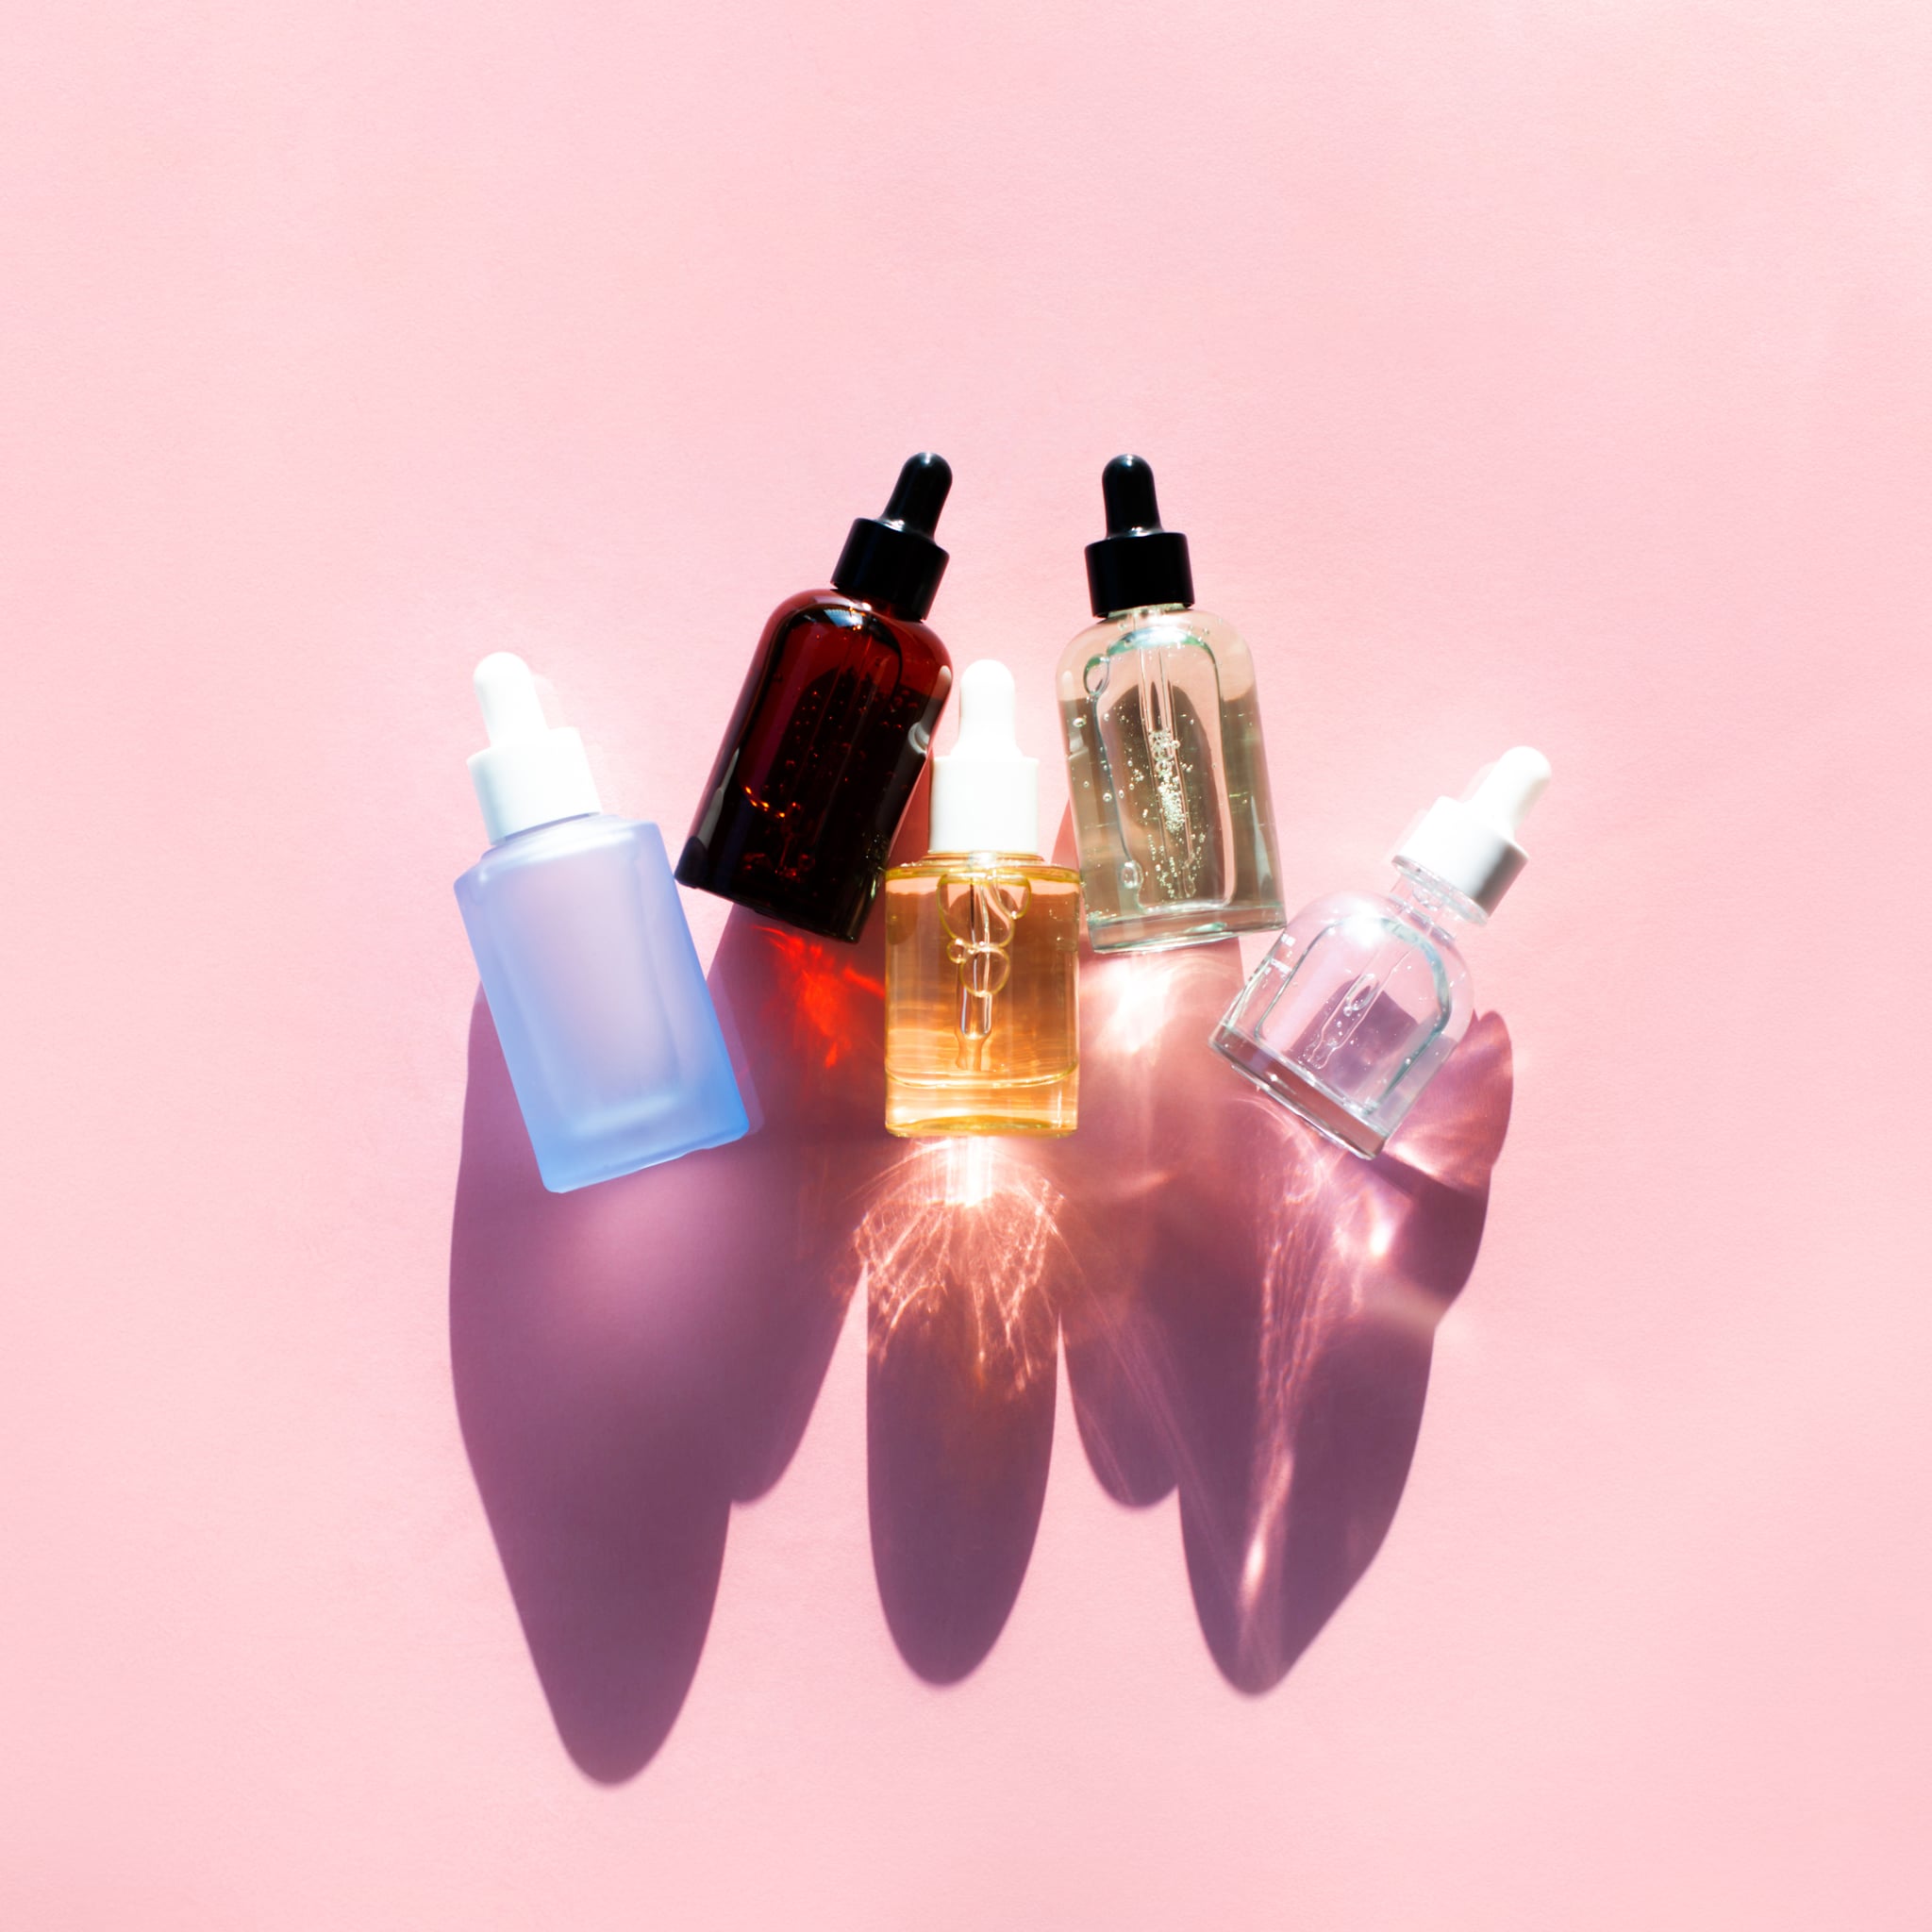 Top view of bottles of moisturizing cosmetic products arranged in line on pink background. Beauty product of the year